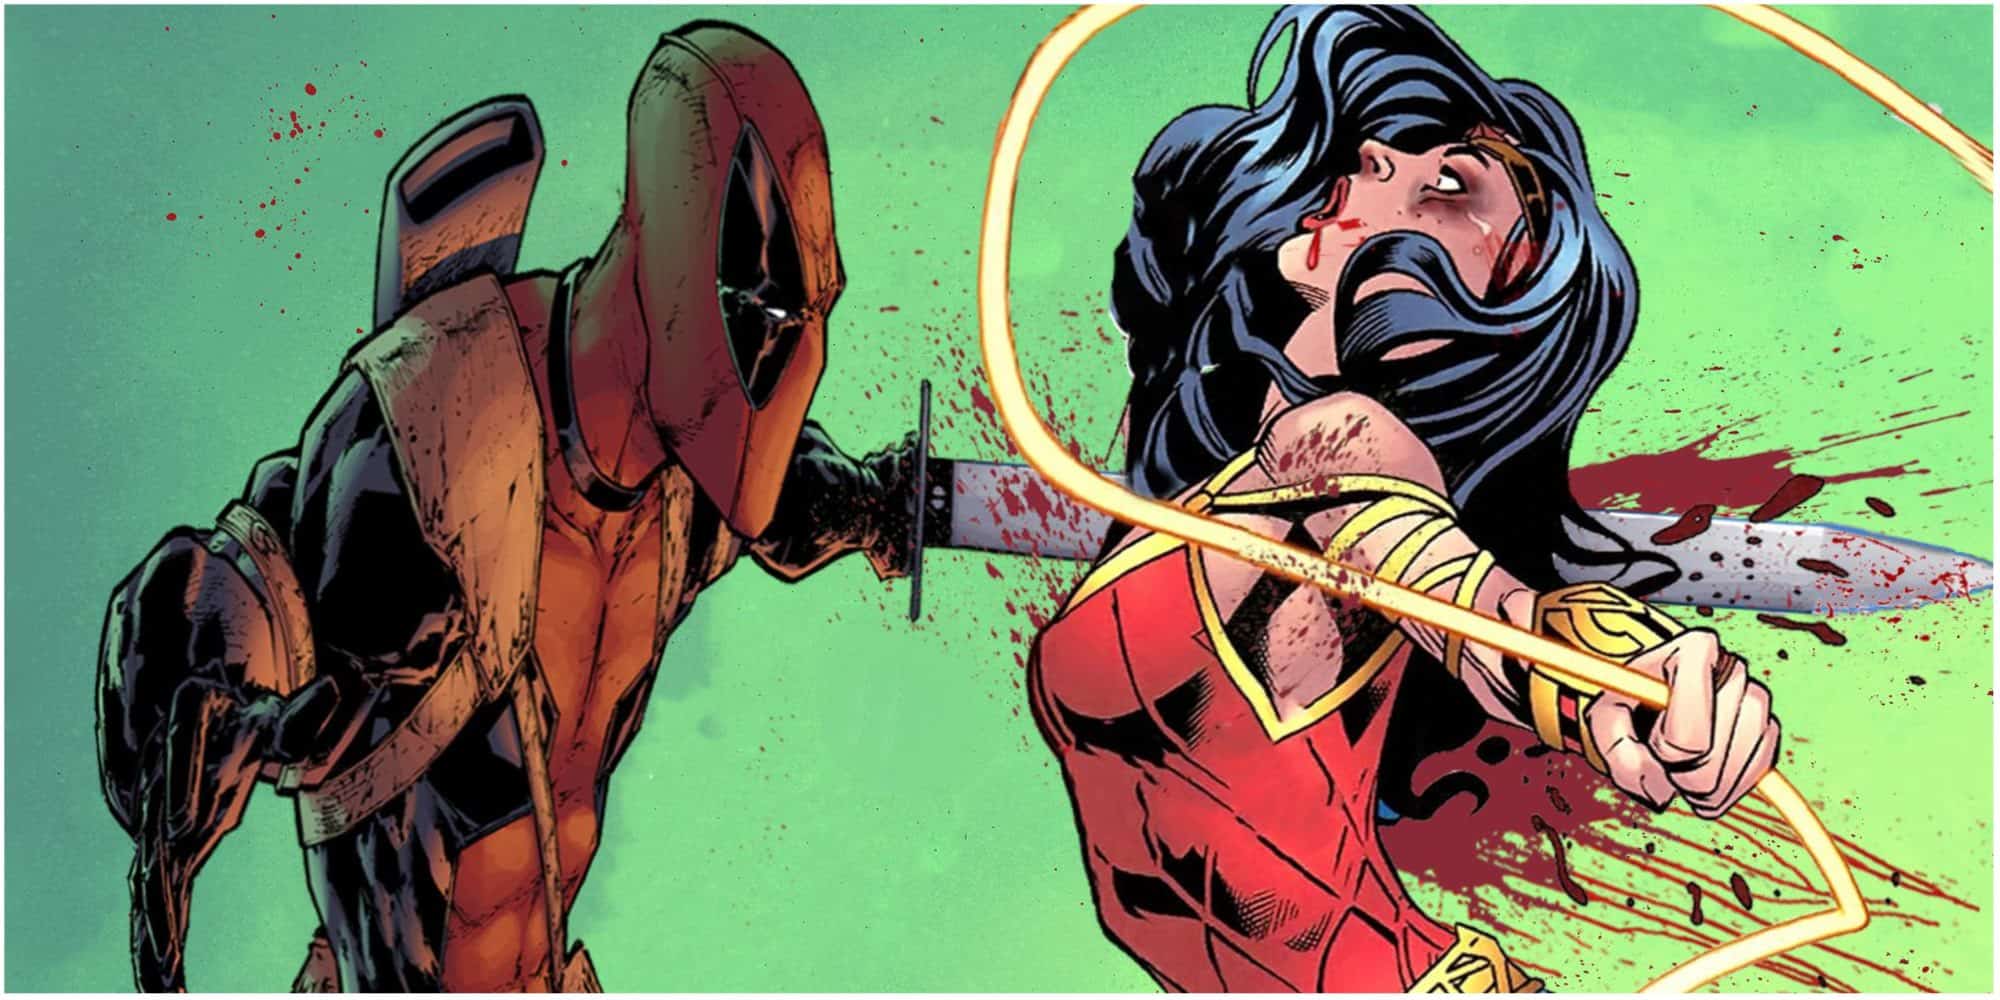 30 Characters Who Can Beat Deadpool - Wonder Woman